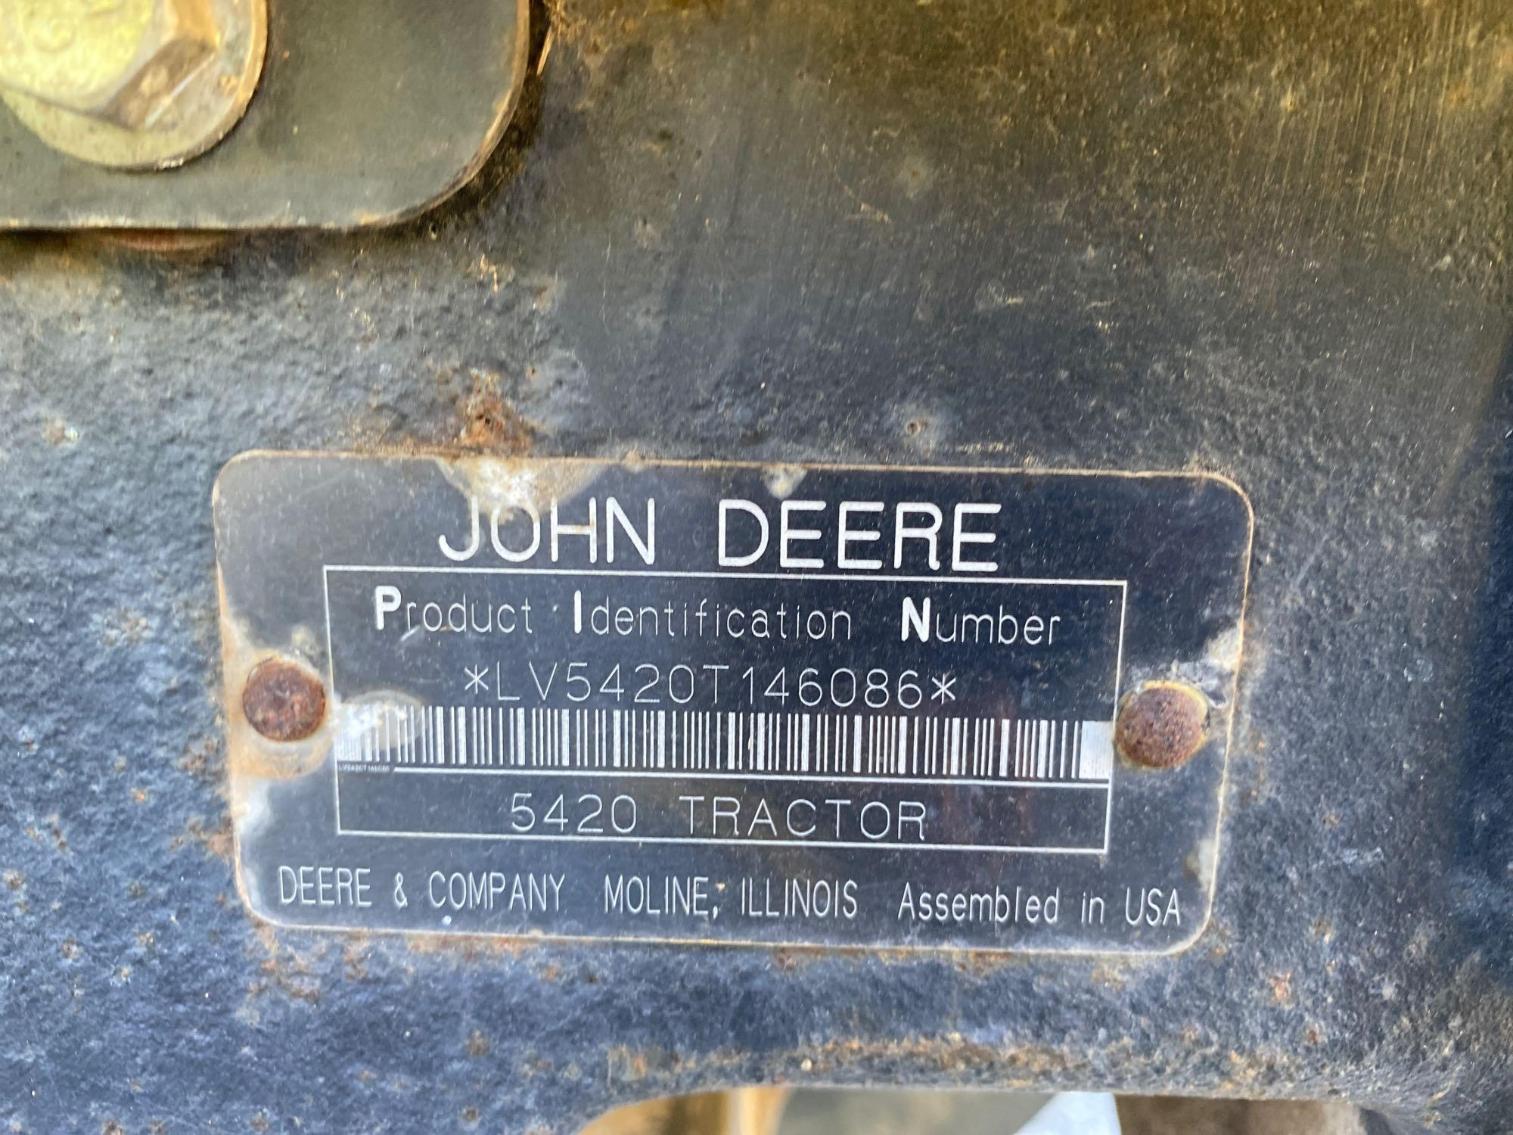 Image for John Deere 5420 Tractor Product ID:  LV5420T146086